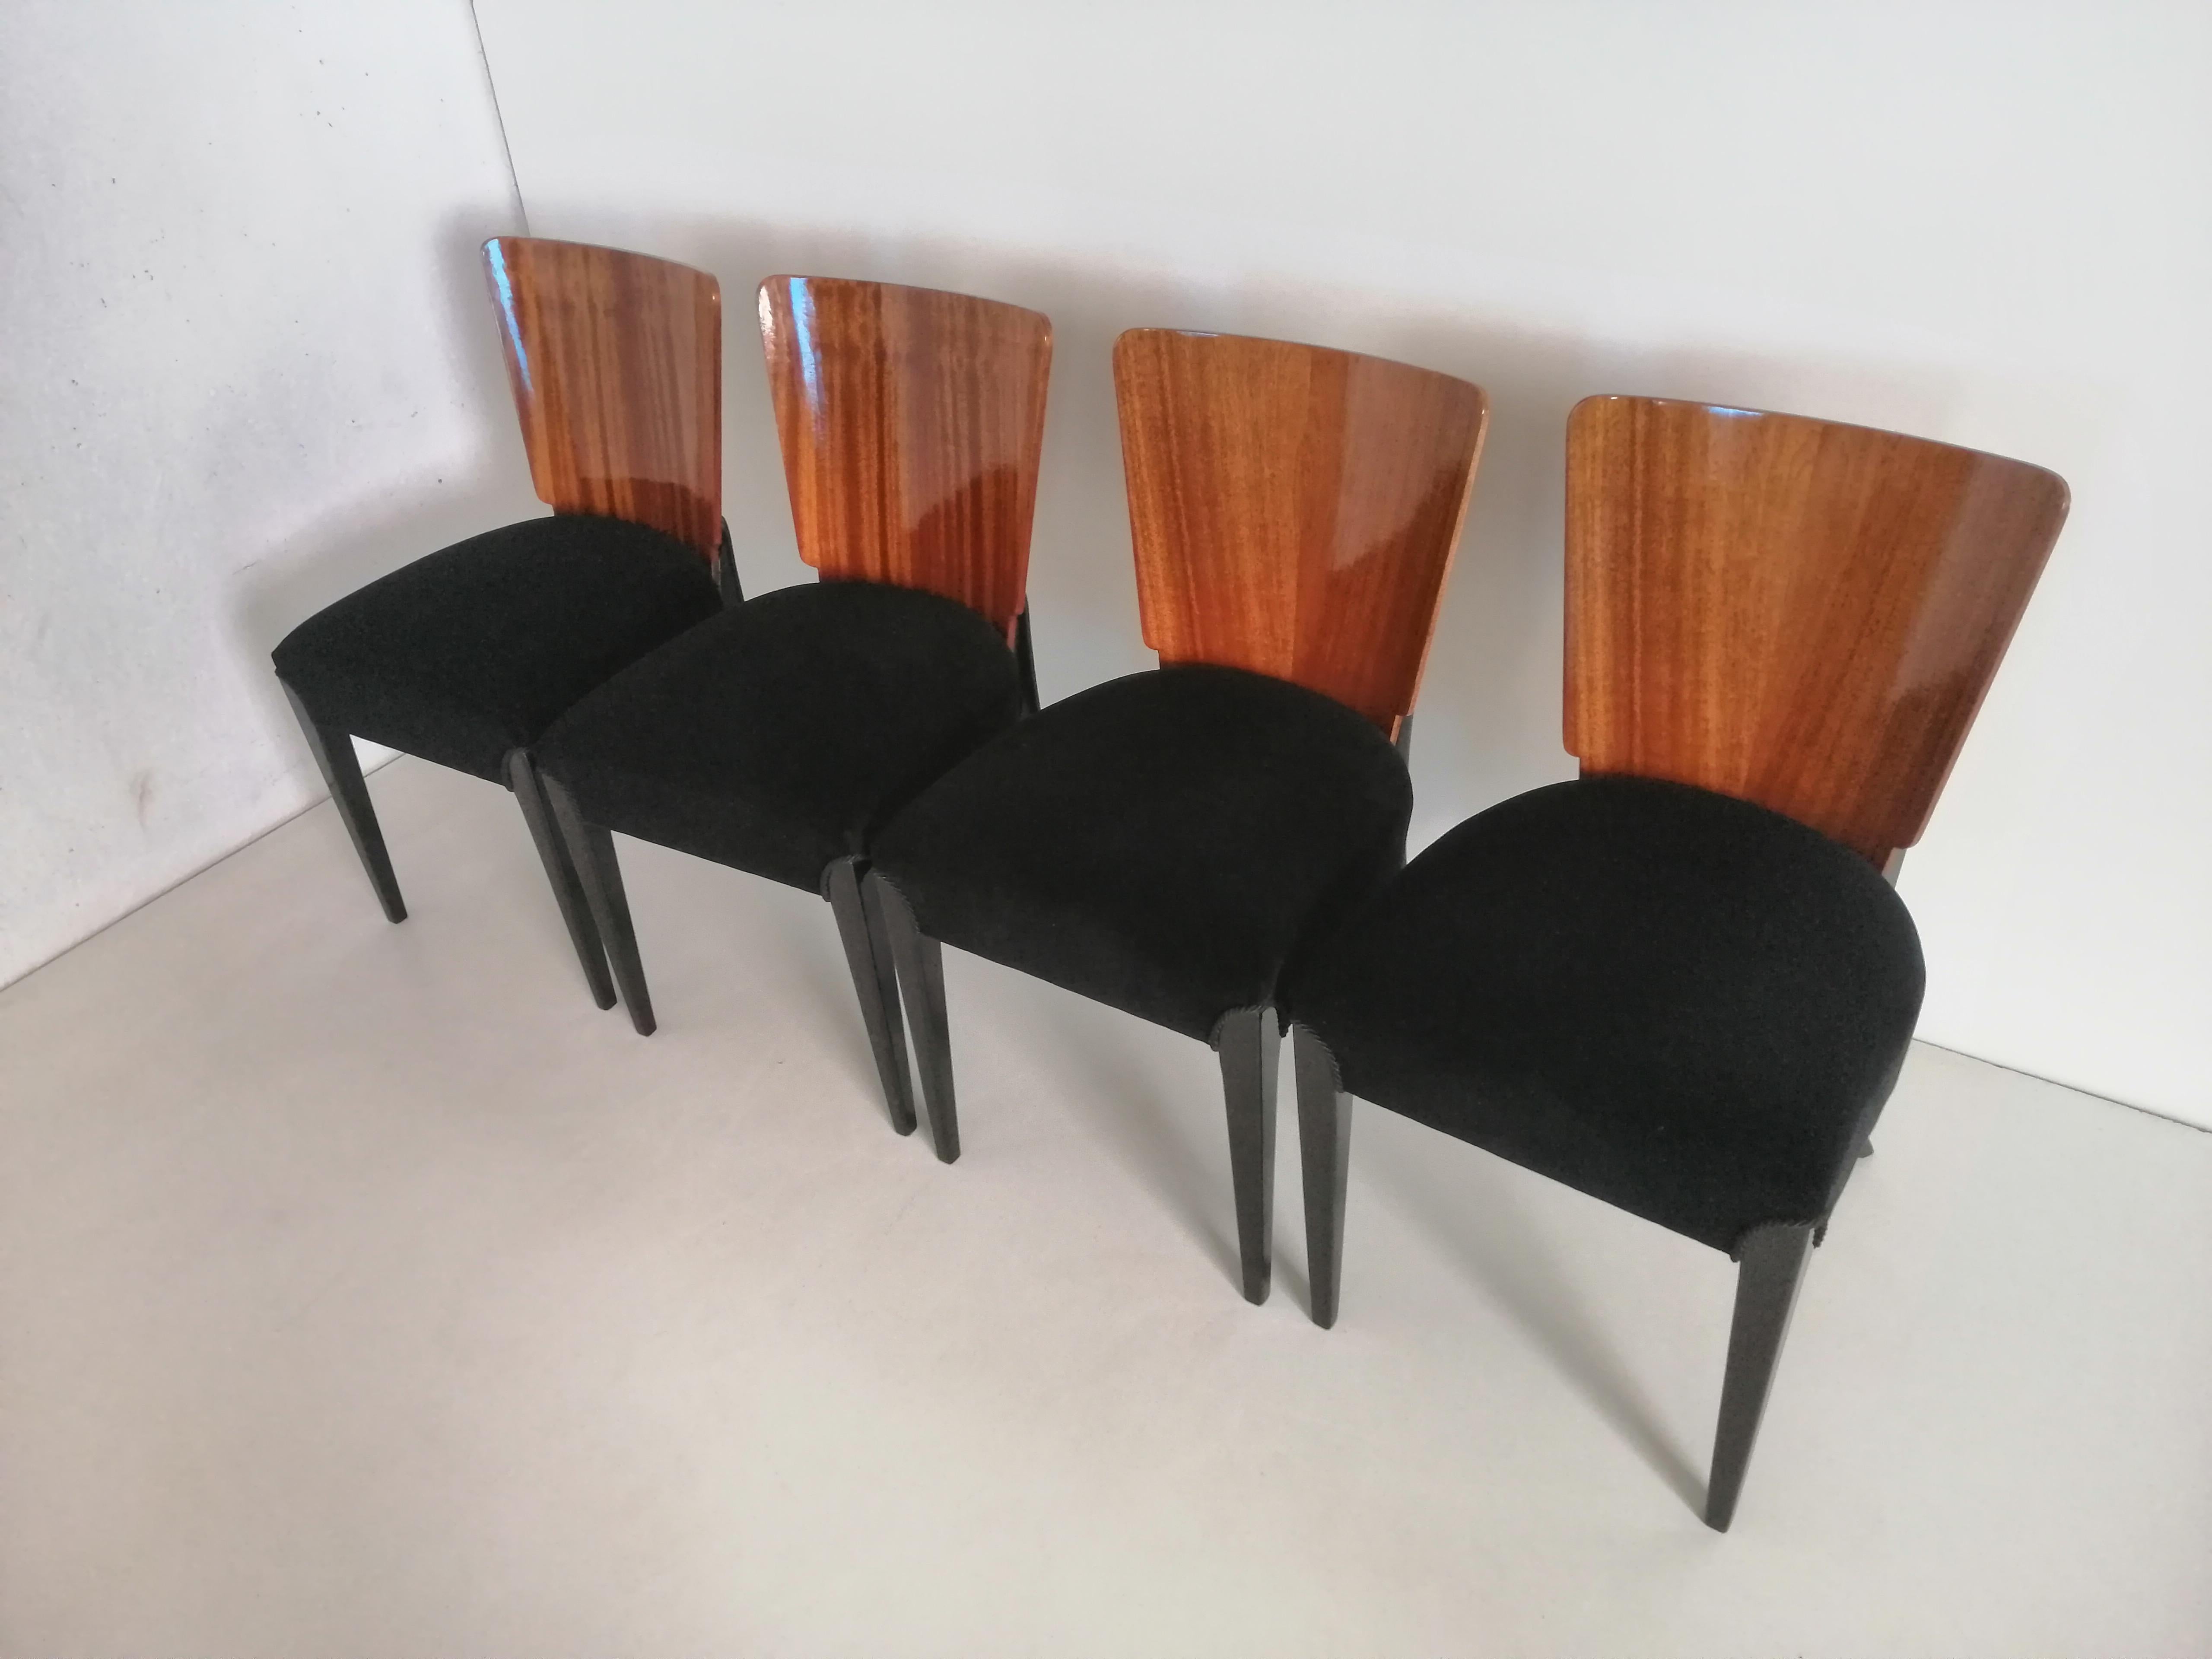 Art Deco four chairs by J.Halabala from 1940 we present the chairs by J.Halabala from 1940s (a Czech designer ranked among the most outstanding creators of the modern period. The peak of his career fell on the 1930s and 1940s when he worked for a